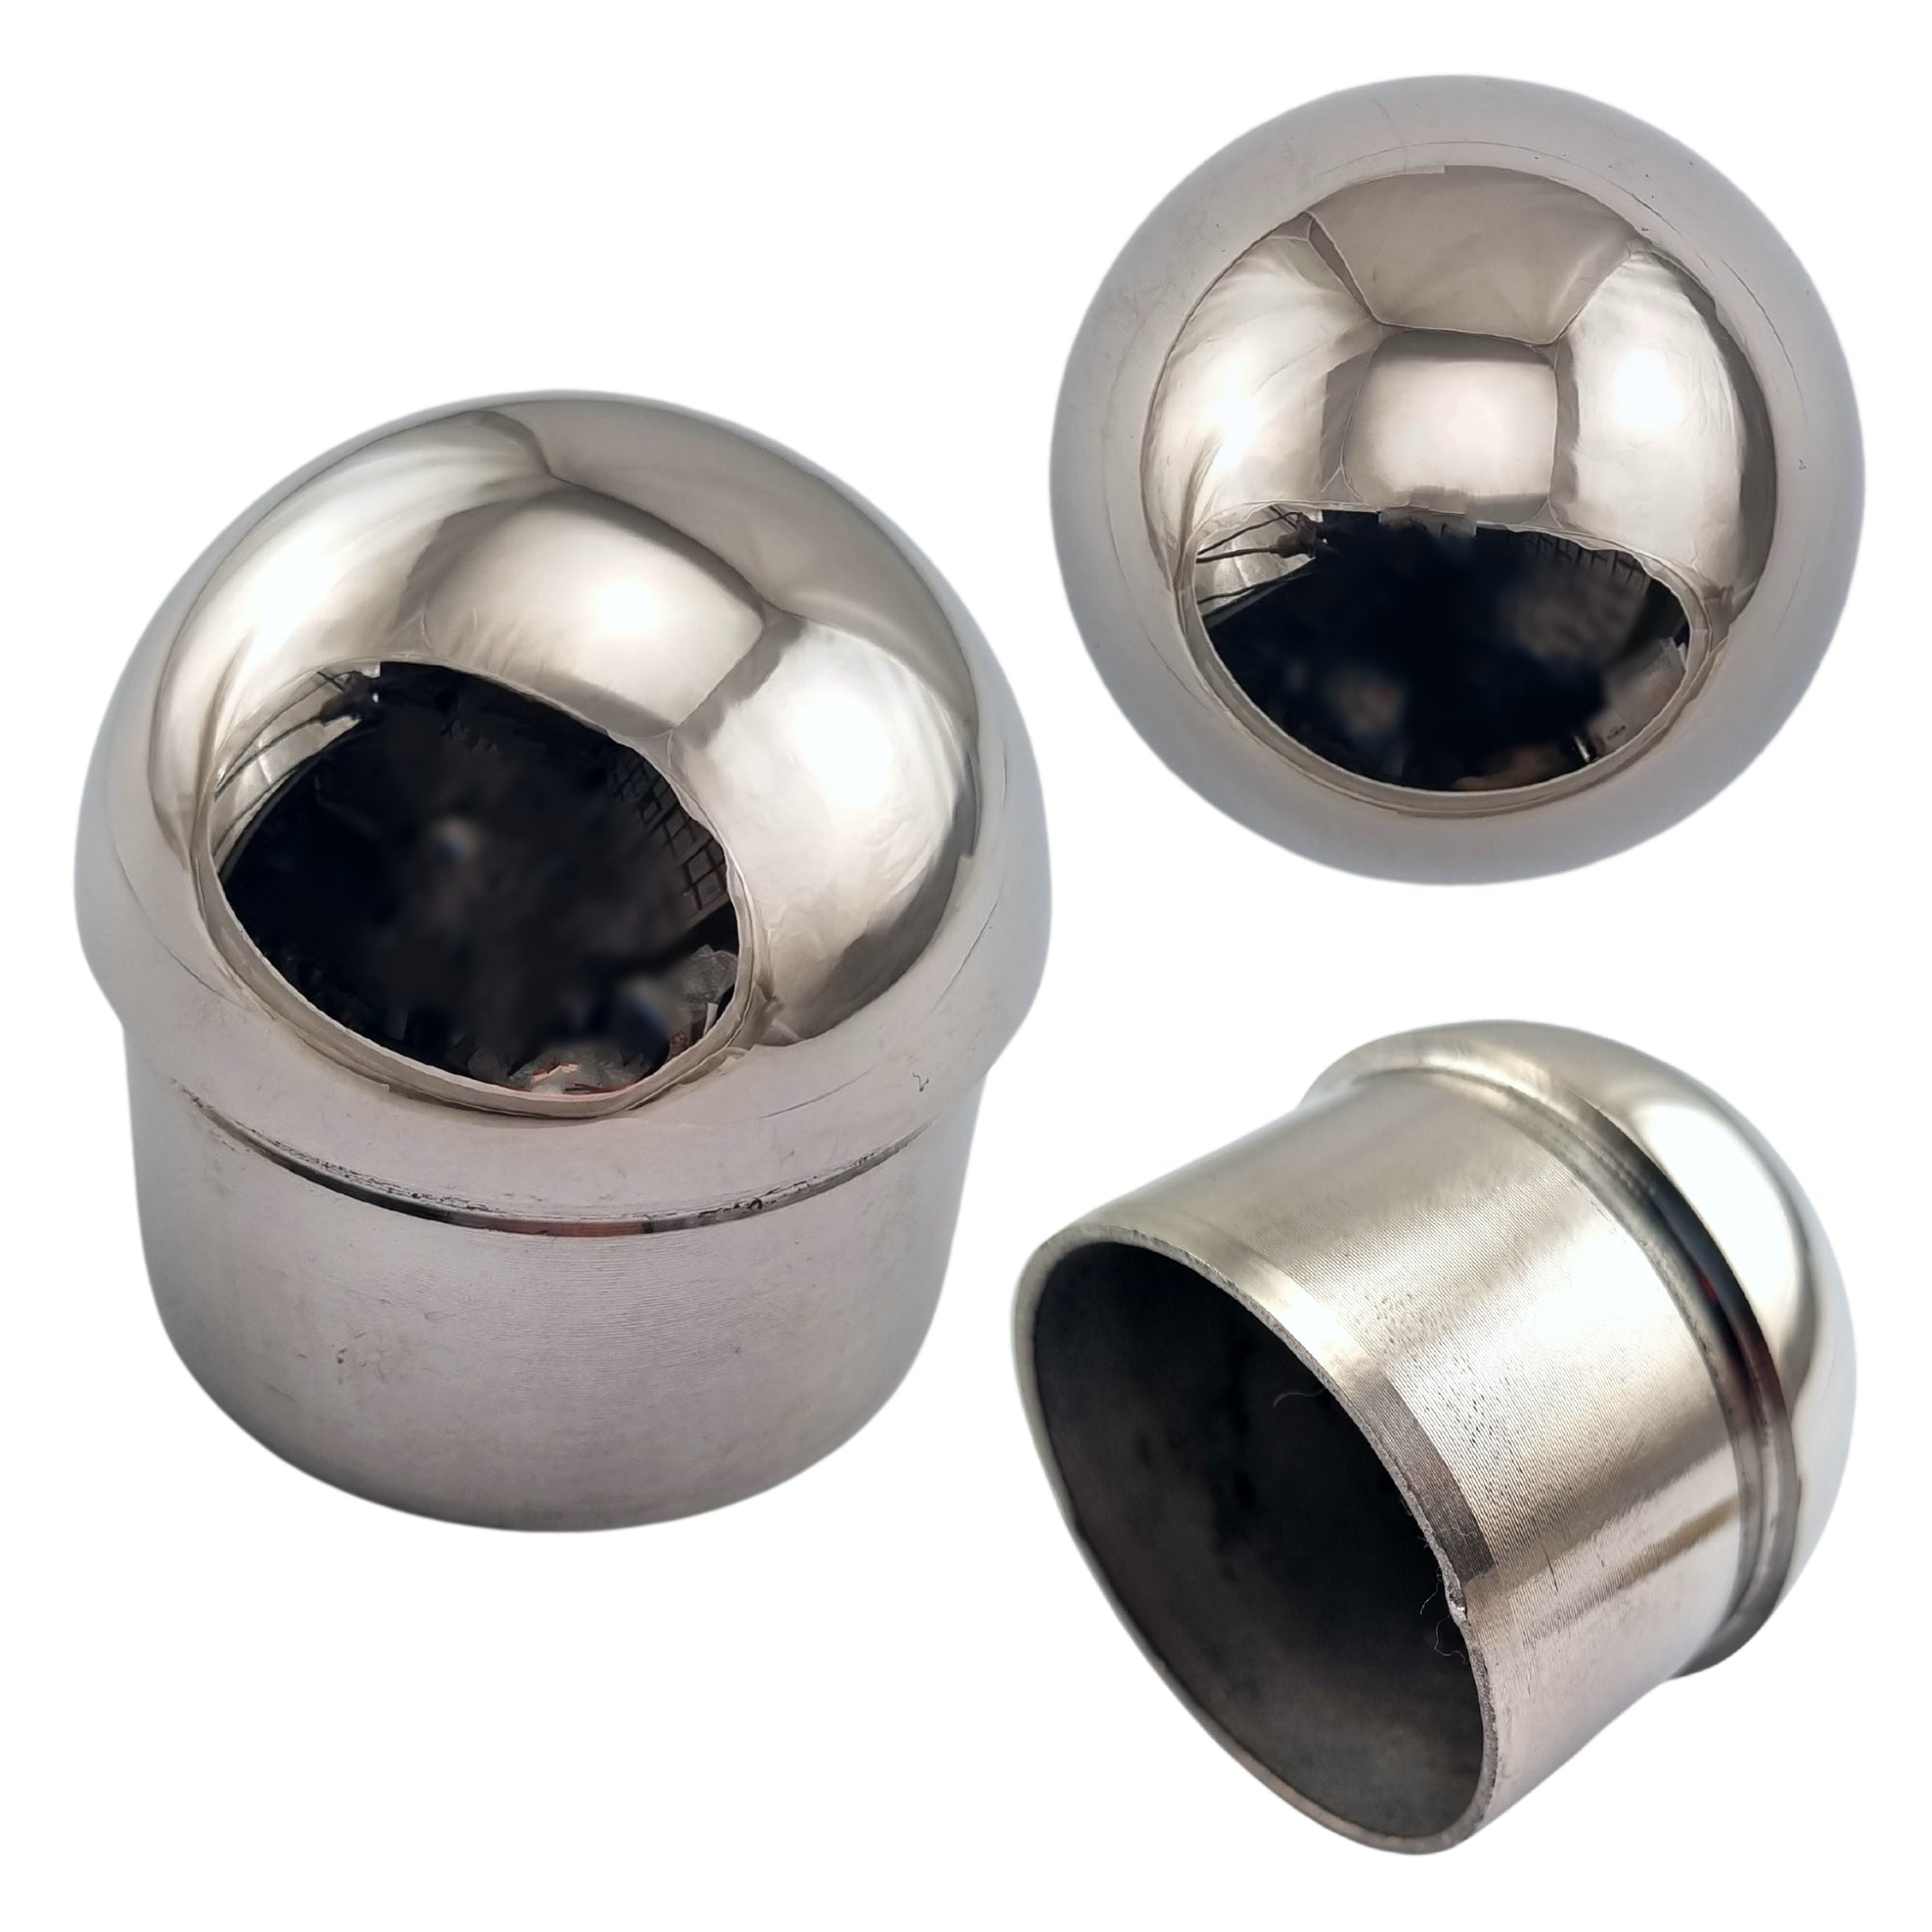 End Cap Domed Stainless Steel Rail Fitting for 50.8mm (2-inch) pipe. Australia wide shipping. Shop: chain.com.au